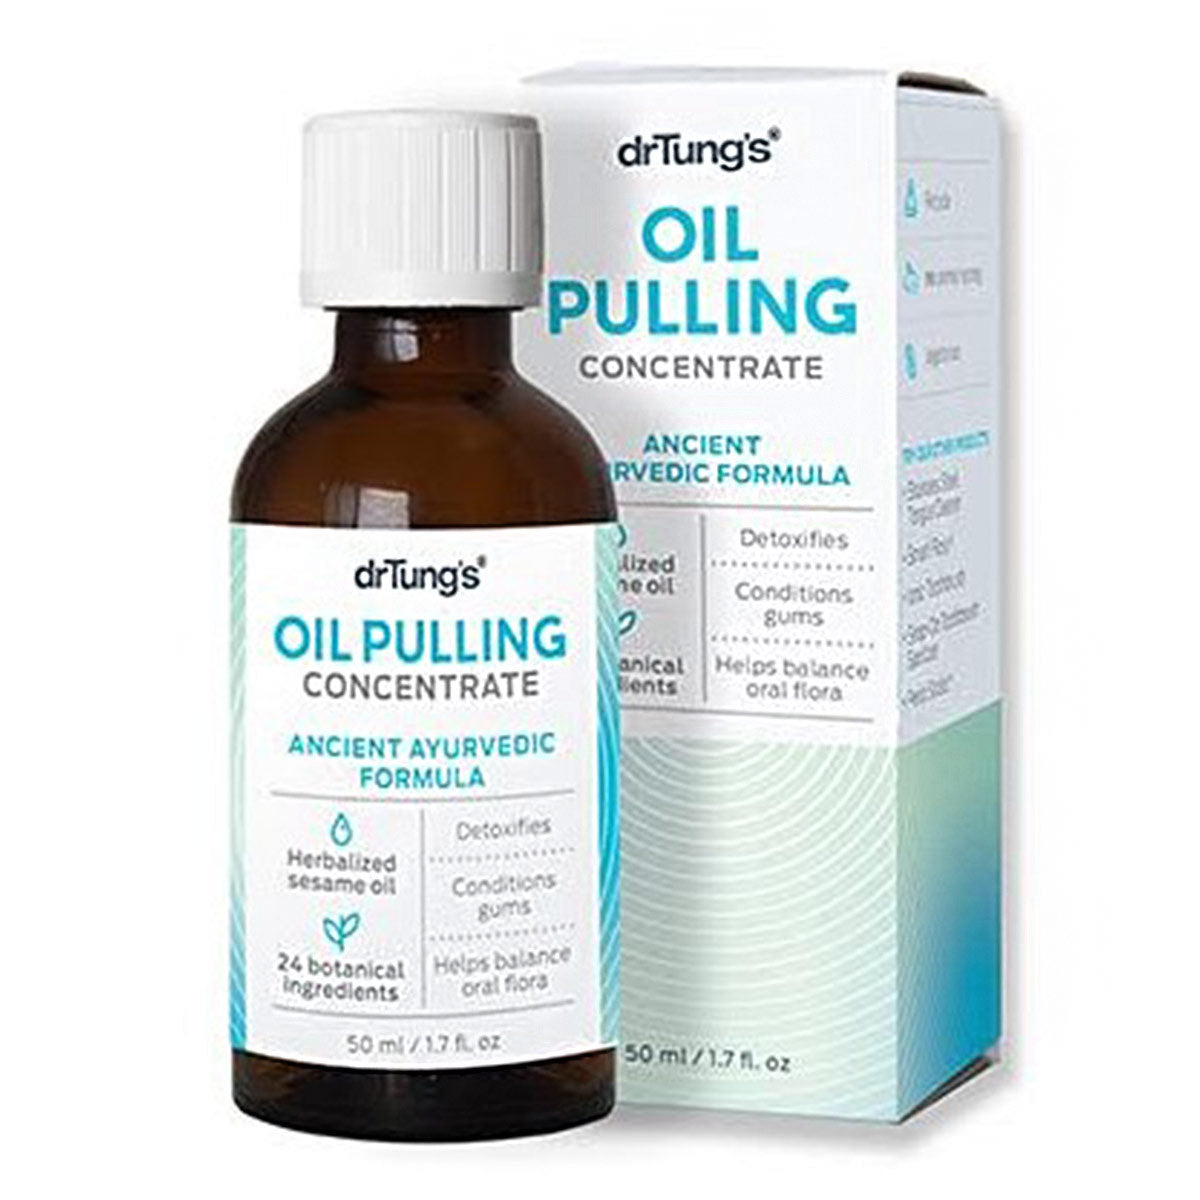 Primary image of Oil Pulling Concentrate